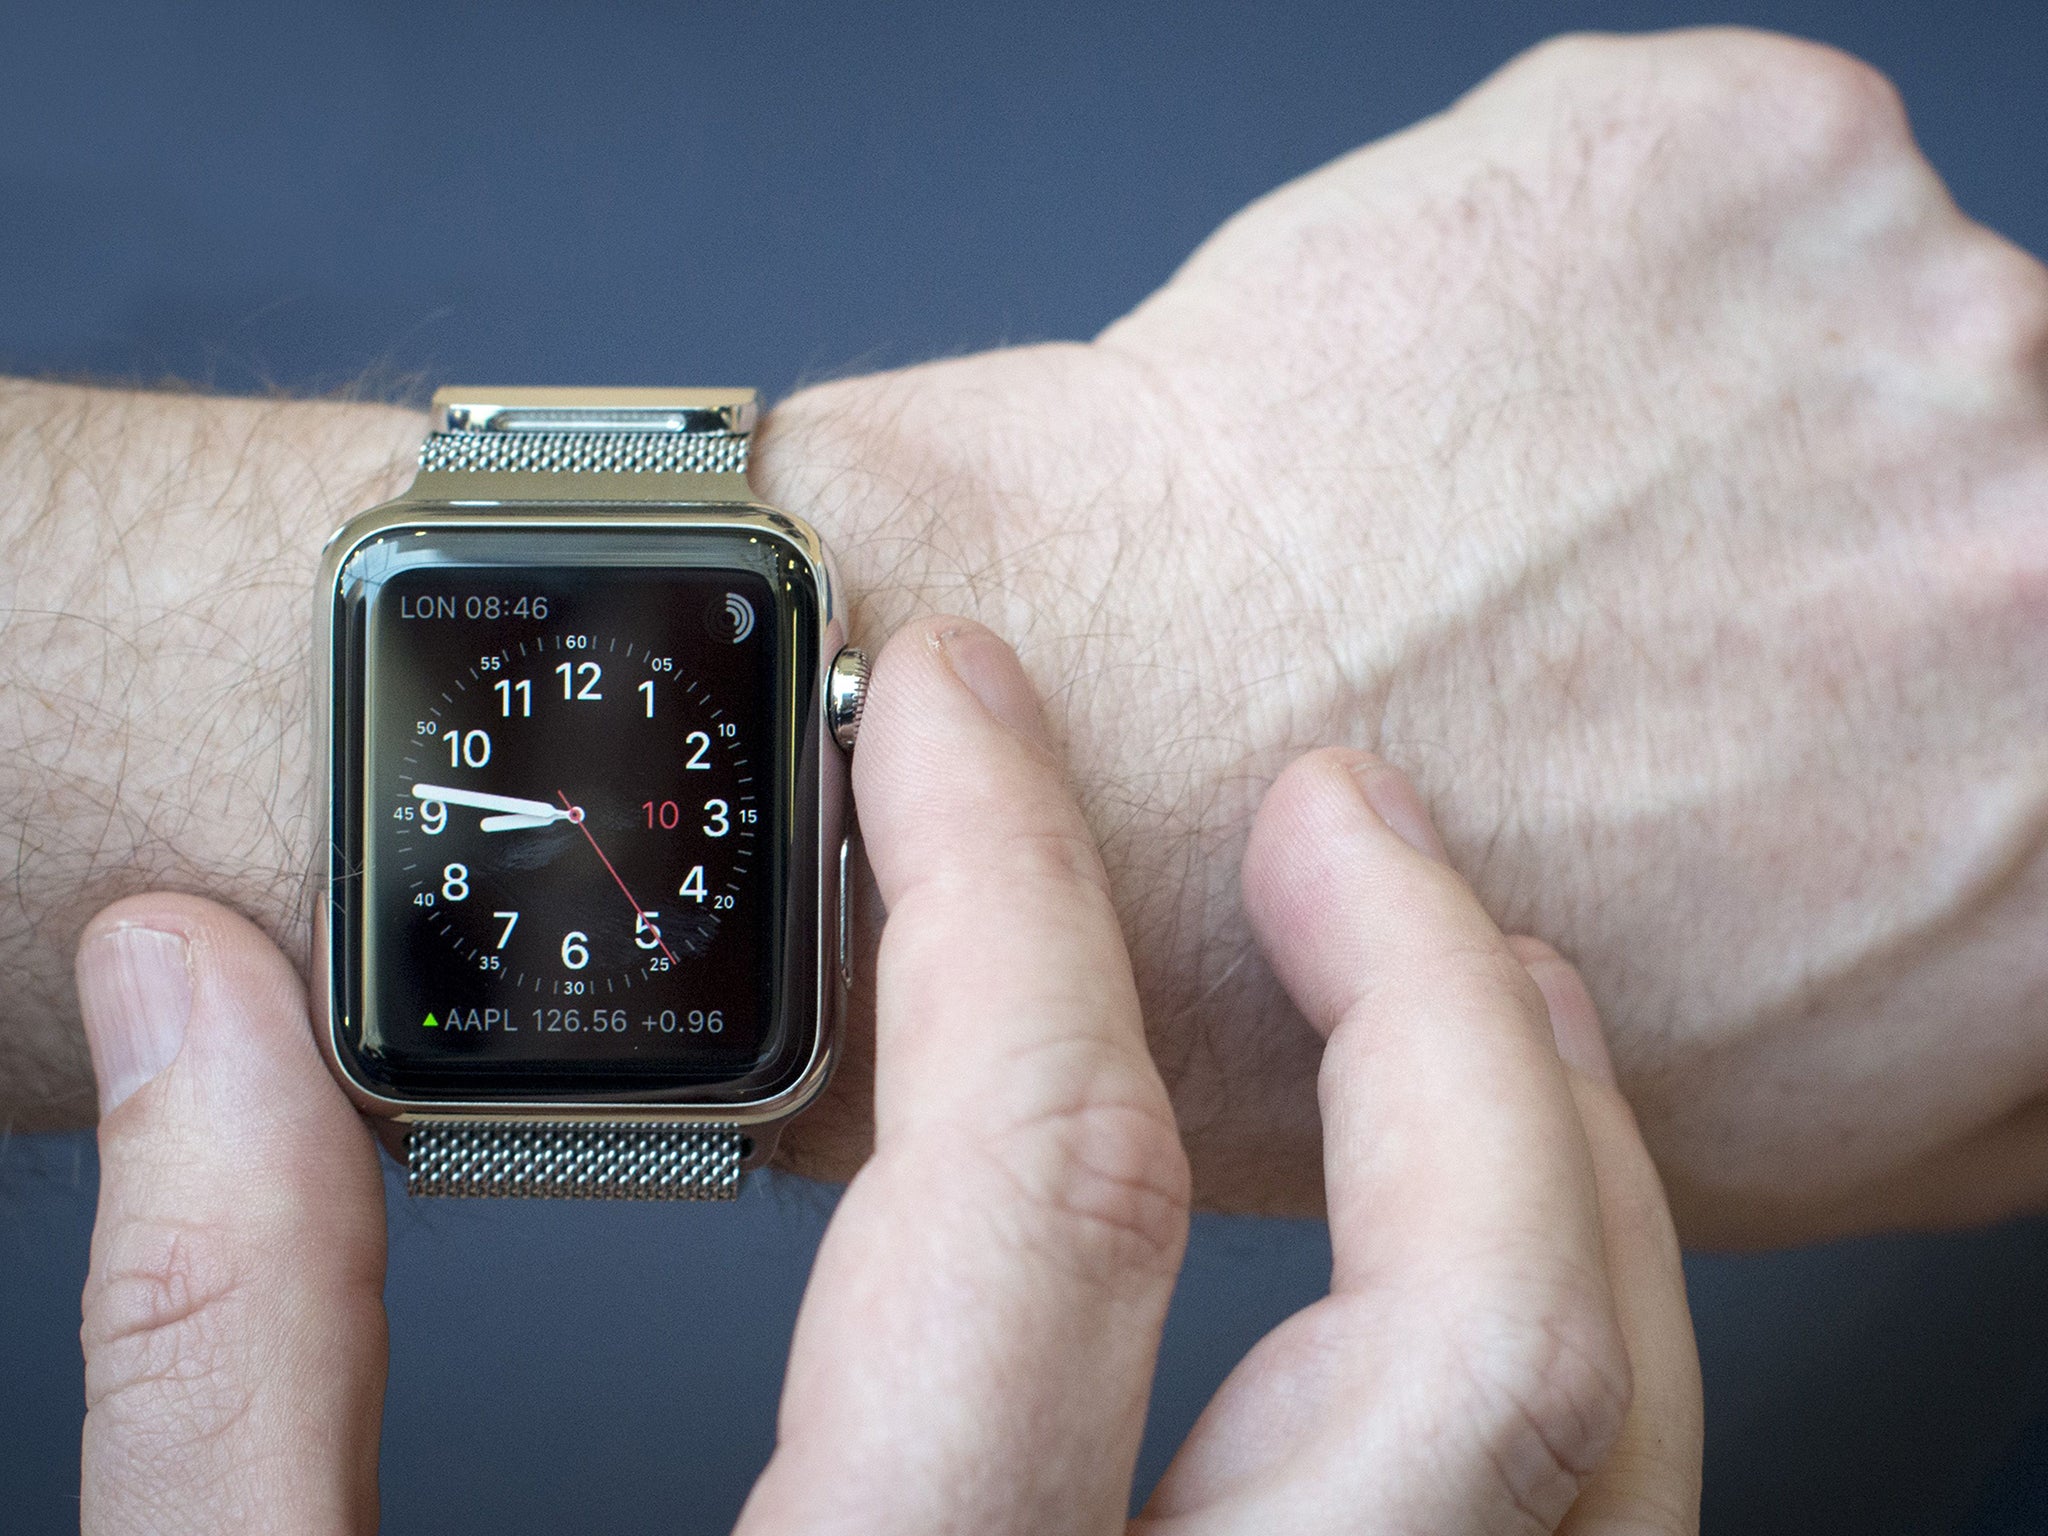 Apple Watches have failed to capture the imagination of the wider public